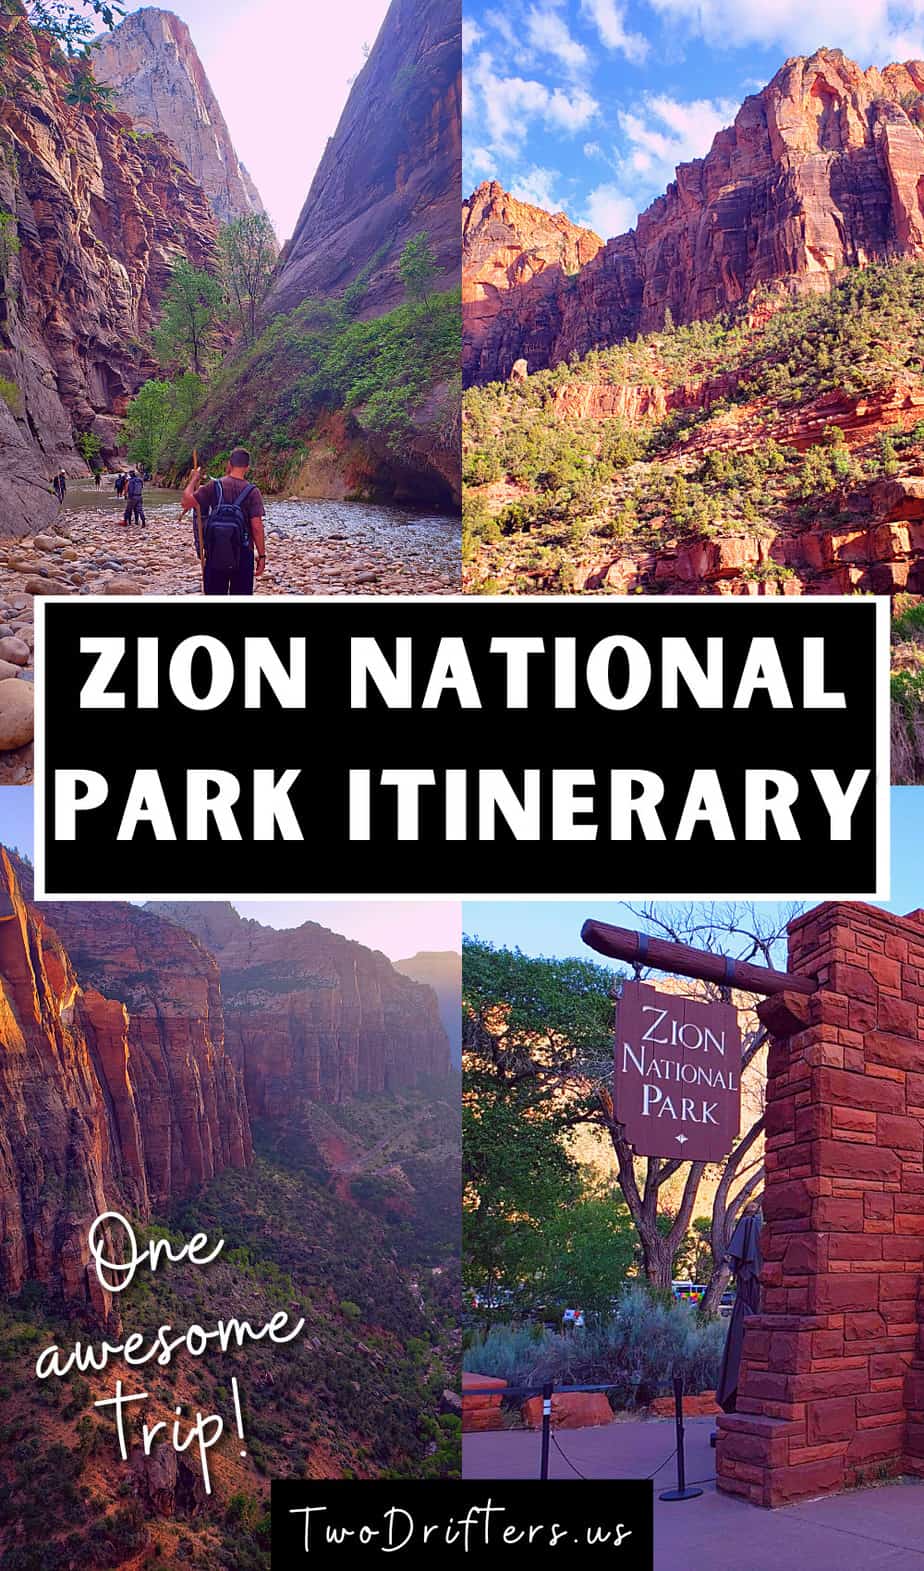 Pinterest social image that says "Zion National Park Itinerary."